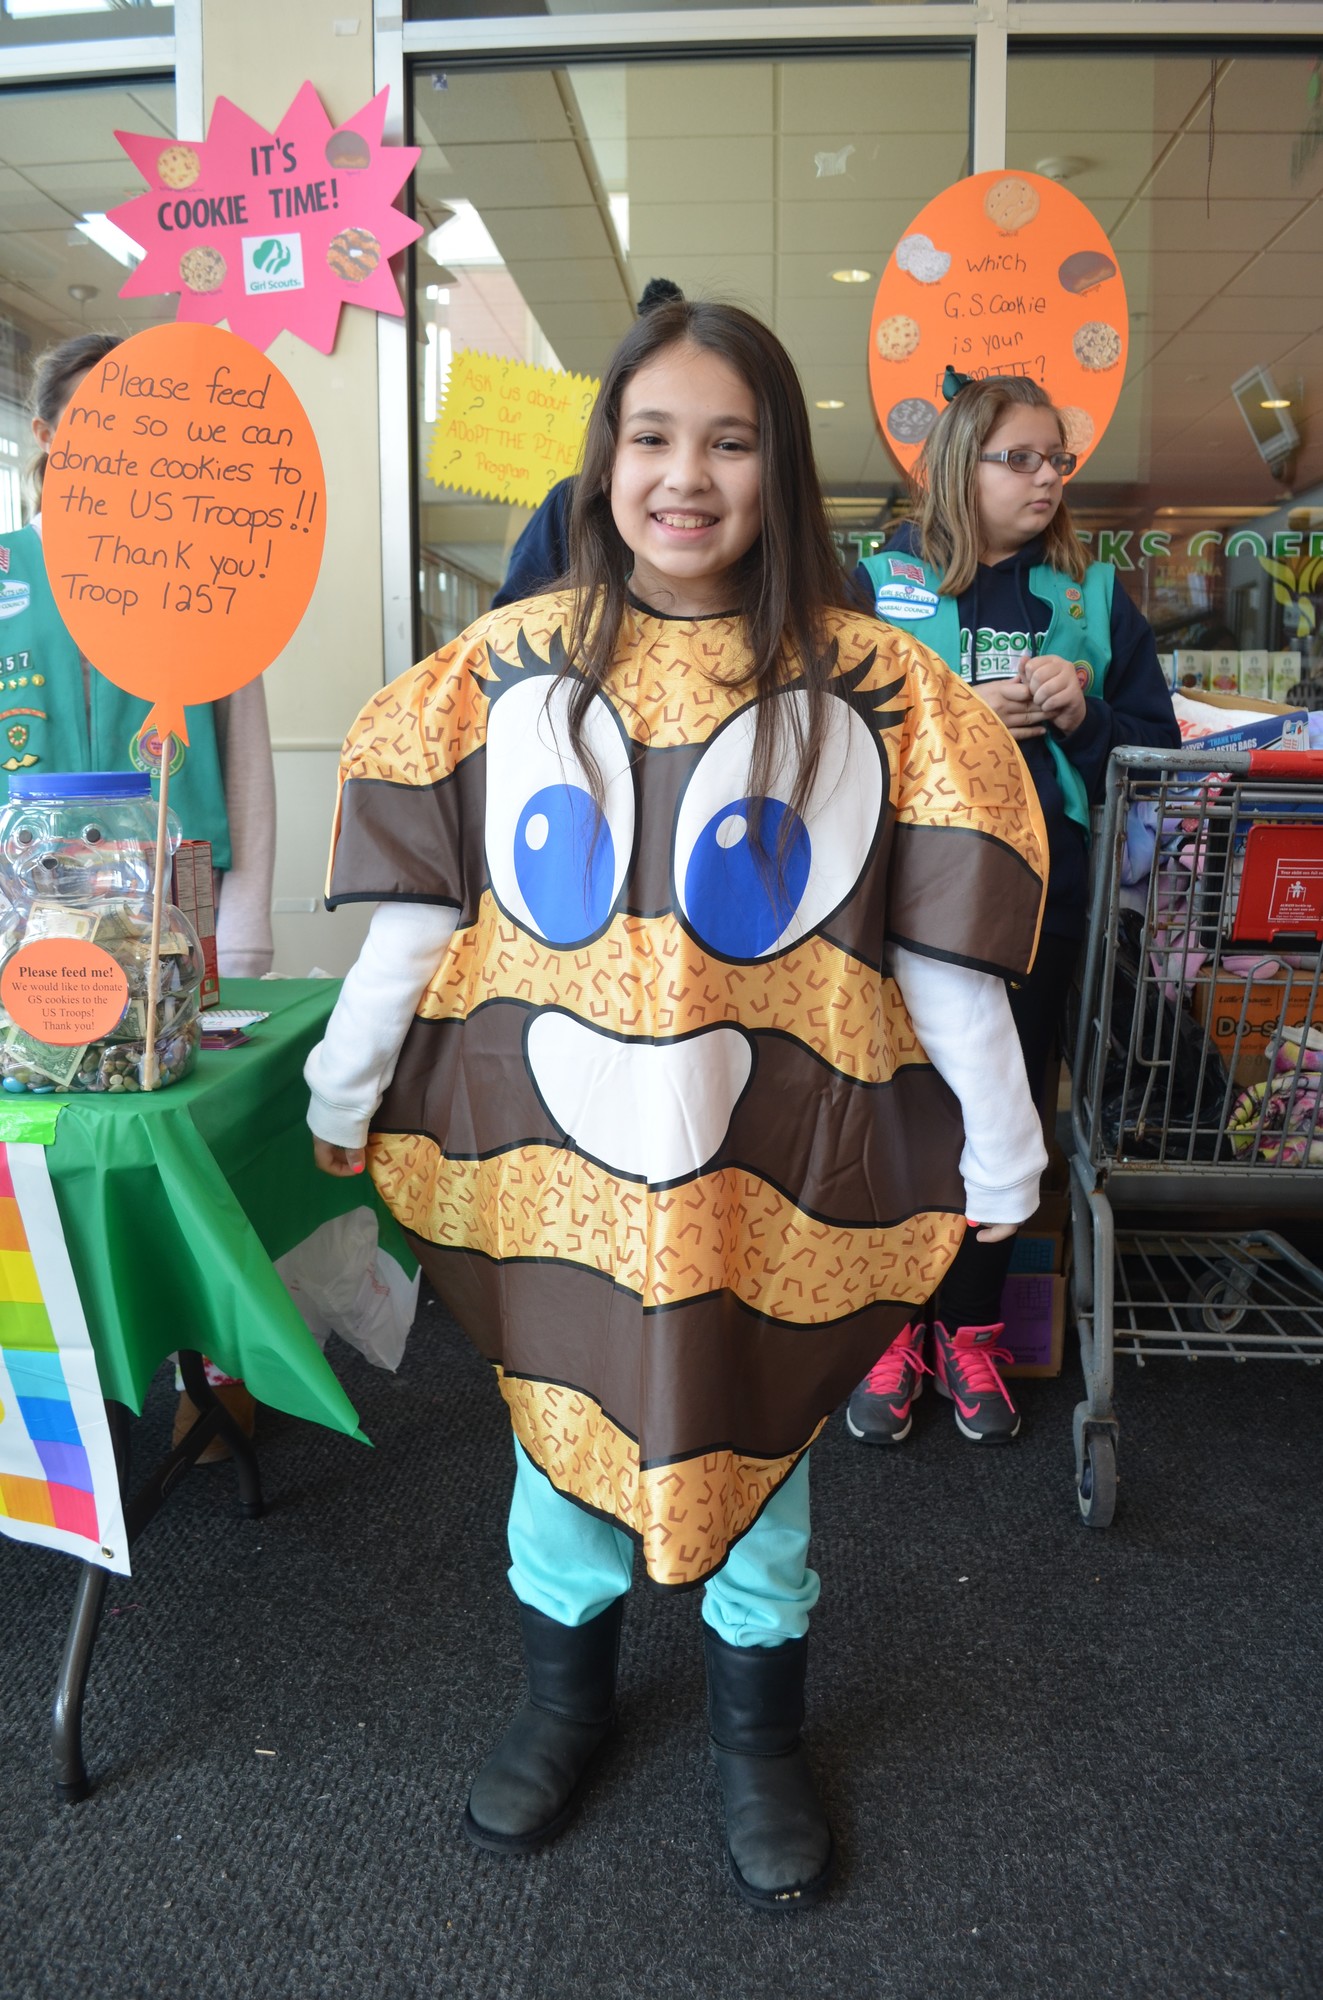 Cassandra O’Connell dressed as a cookie in an effort to sell more boxes for the clean up program.